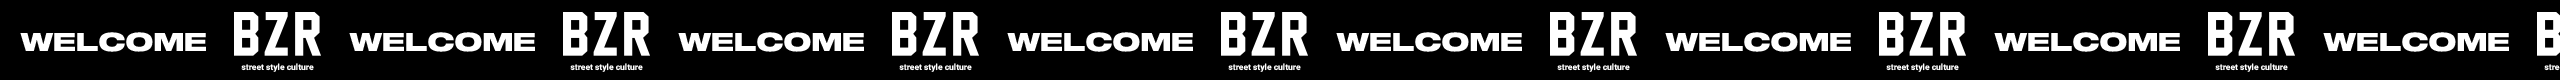 Video with the BZR Street style culture logo in white and the word welcome in white on a black background